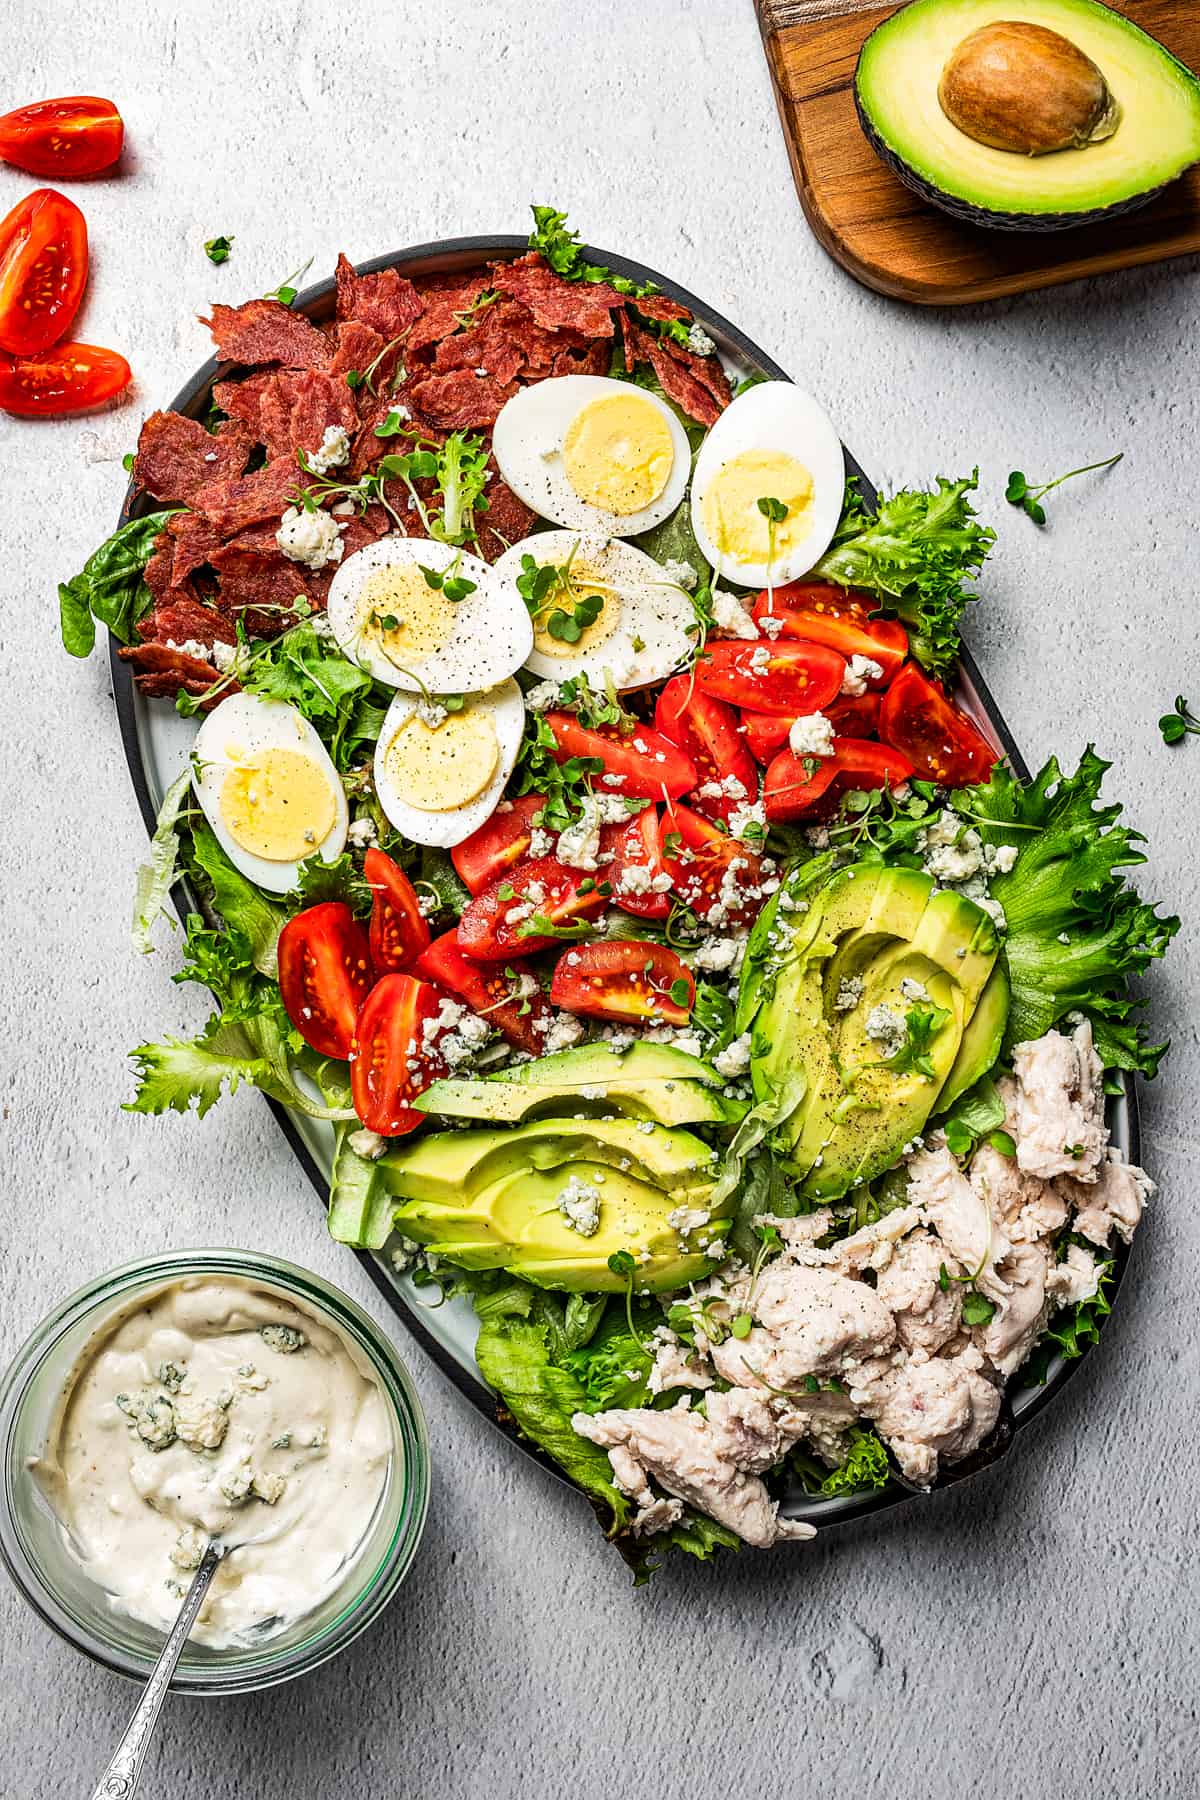 Overhead view of a homemade Cobb salad next to a small bowl of blue cheese dressing.